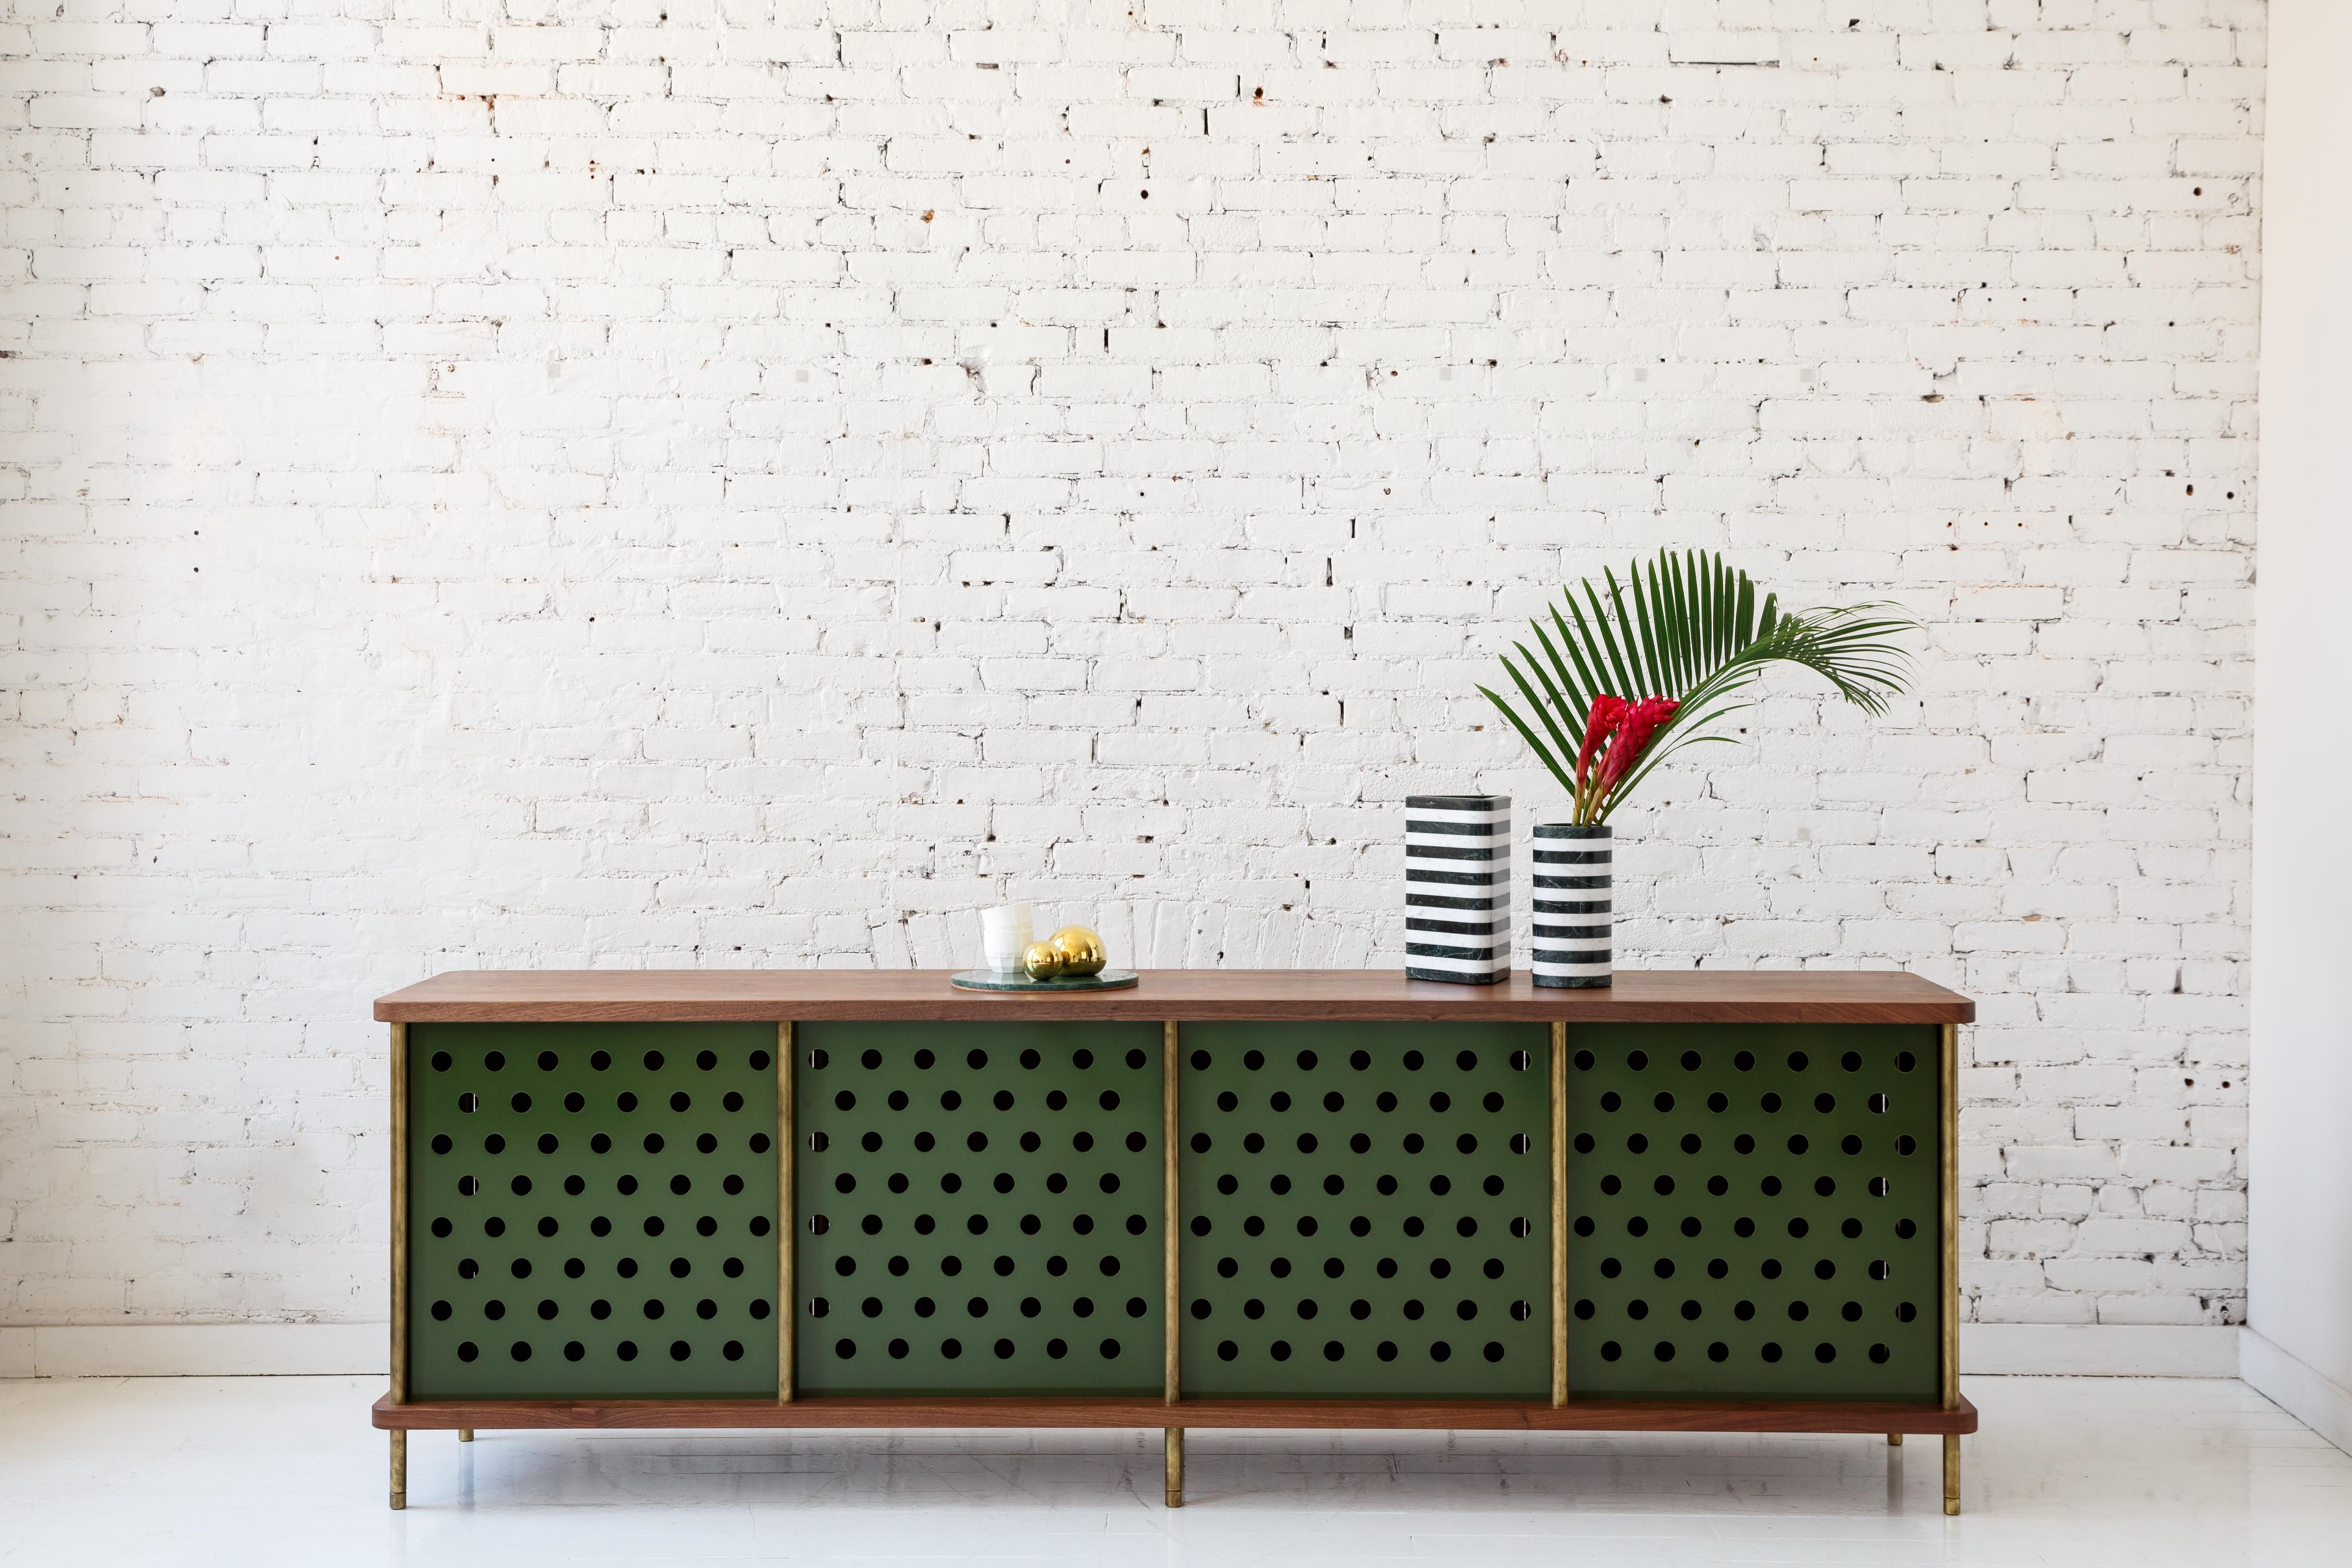 Consistent with the Strata collection, the new Strata Credenza is designed to be modular in order to create versatile configurations tailored to your needs. Immediately available as shown with brass rods, walnut top and powder coated aluminum